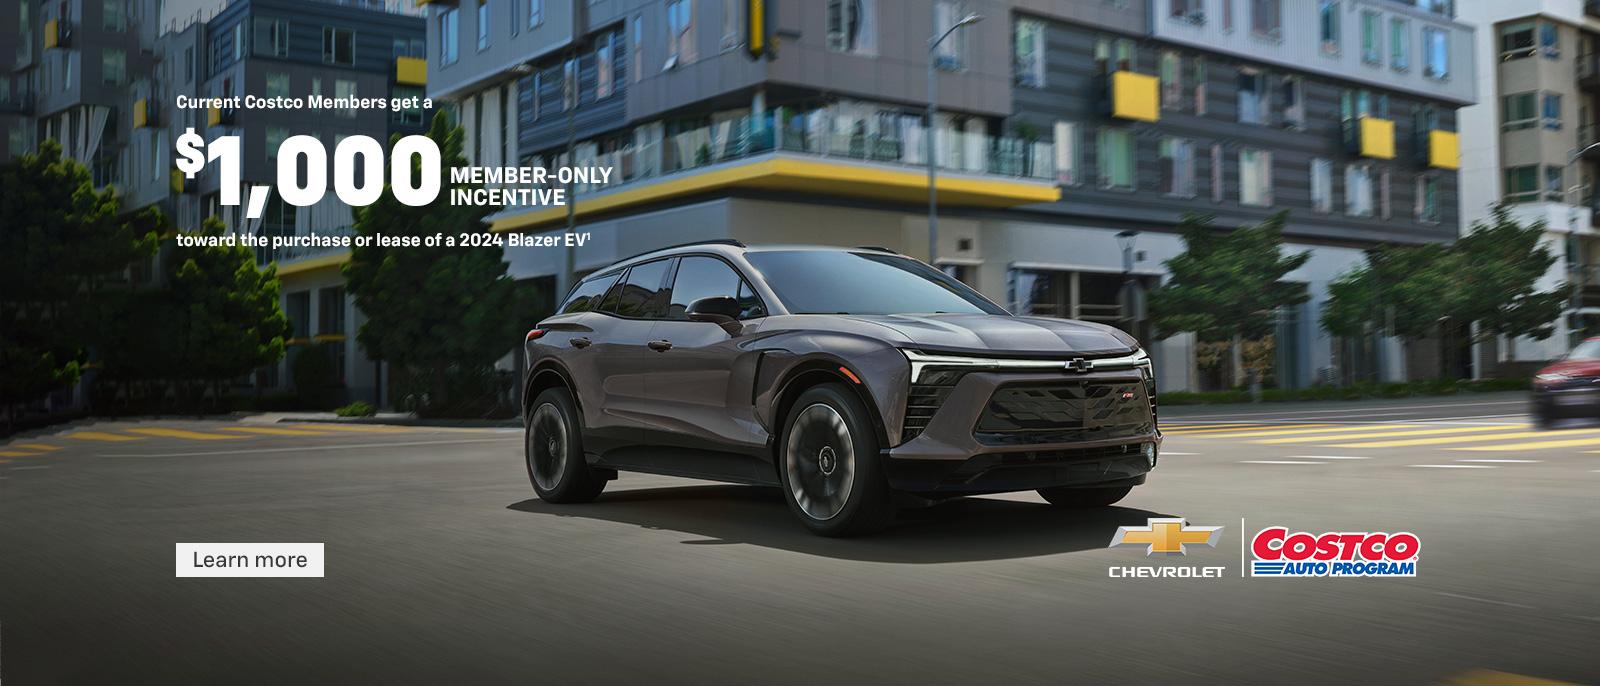 2024 Chevy Blazer EV. The first-ever, all-electric Blazer EV. Current Costco members get a $1,000 member-only incentive toward the purchase or lease of a 2024 Blazer EV.